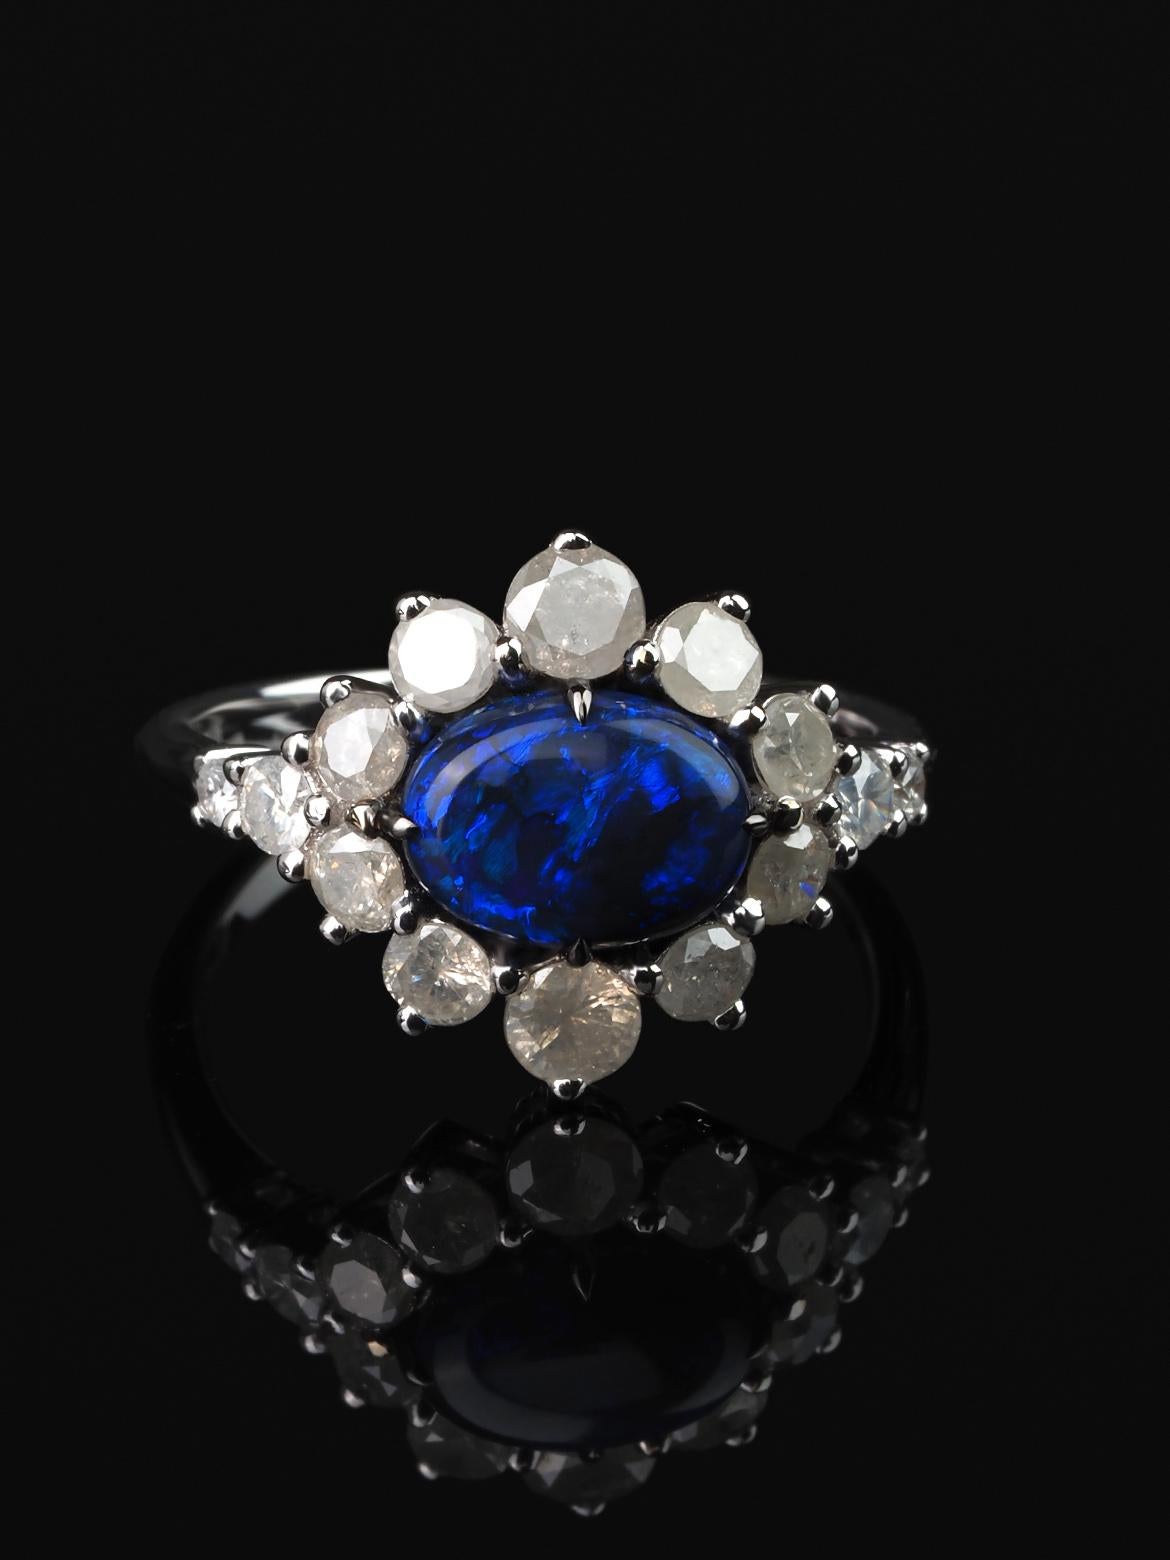 18K white gold ring with natural Black Opal and White Icy Diamonds
opal origin - Australia
opal measurements - 0.28 х 0.35 in / 7 х 9 mm
stone weight - 2.70 carats
14 diamonds 2.5-3.5 mm
ring weight - 4.45 grams
ring size - 7.5 US 


We ship our